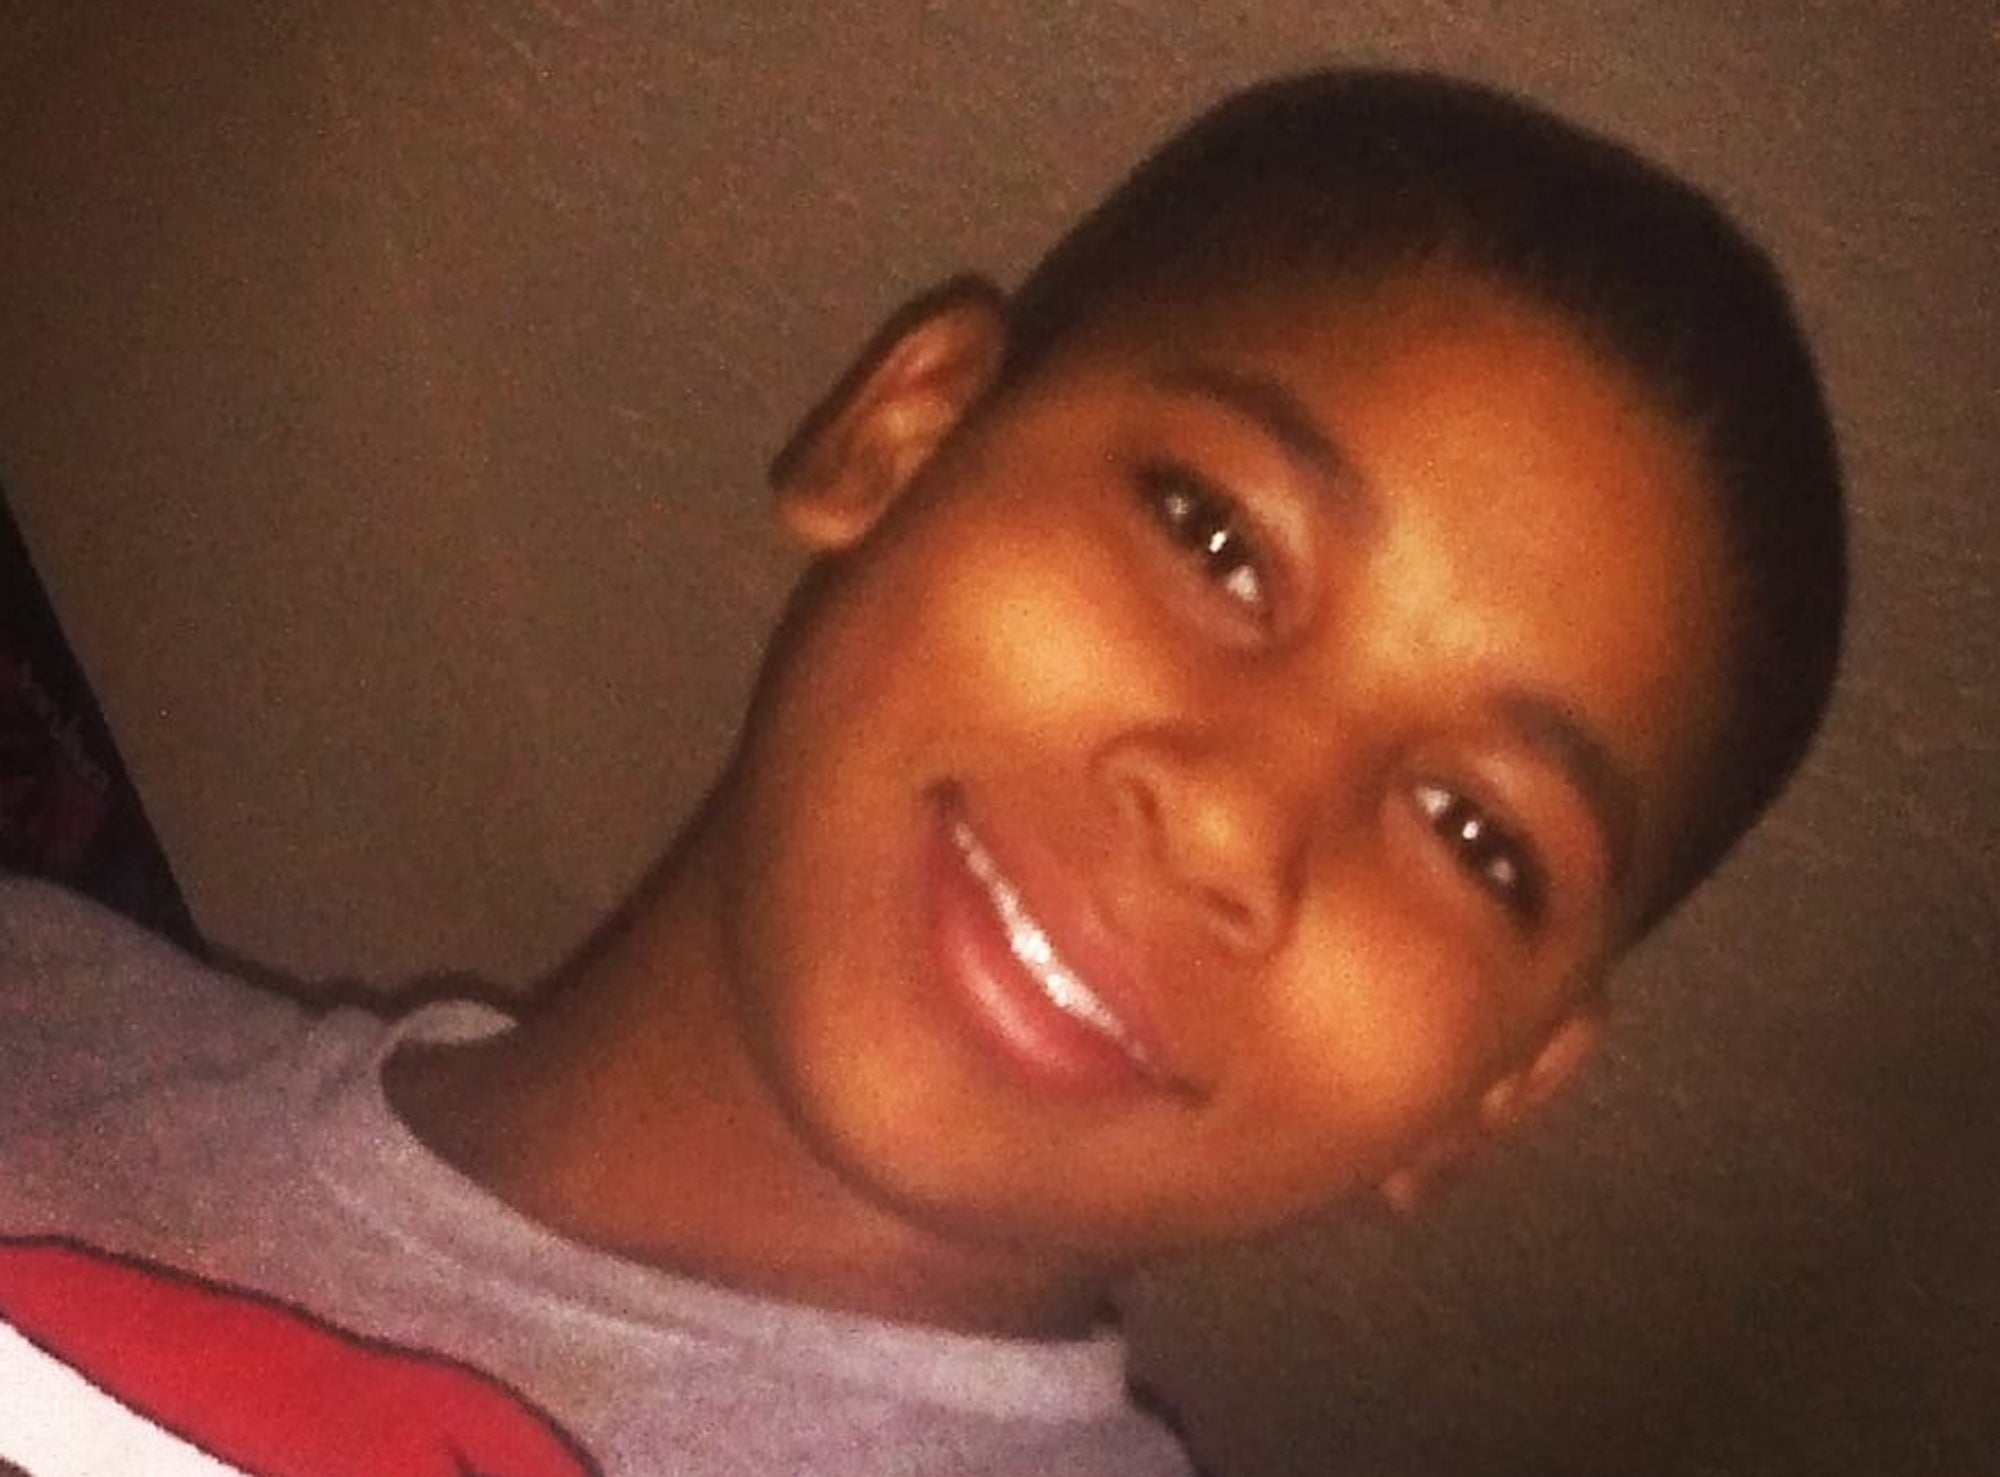 Officer Who Killed Tamir Rice Says ‘He Gave Me No Choice’